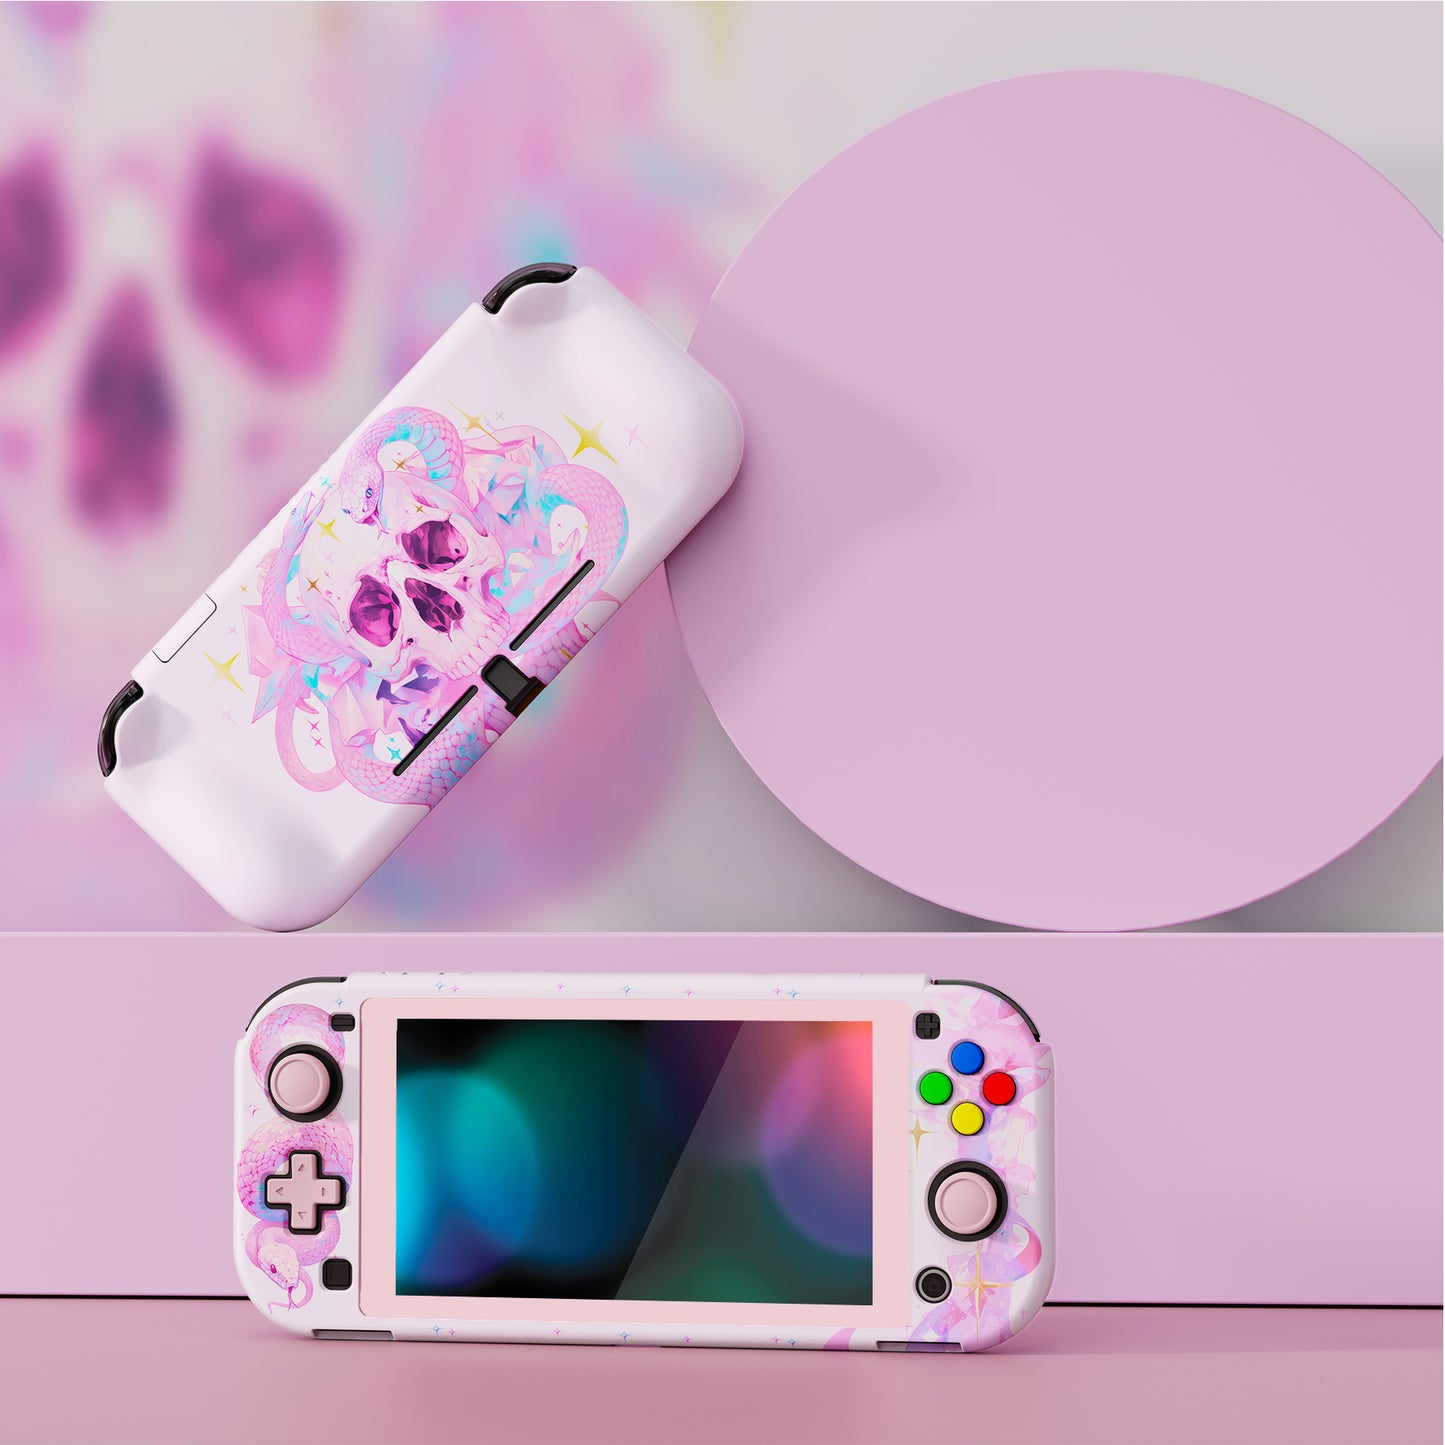 PlayVital ZealProtect Hard Shell Protective Case with Screen Protector & Thumb Grip Caps & Button Caps for NS Switch Lite - Celestial Serpent's Embrace - PSLYR006 playvital